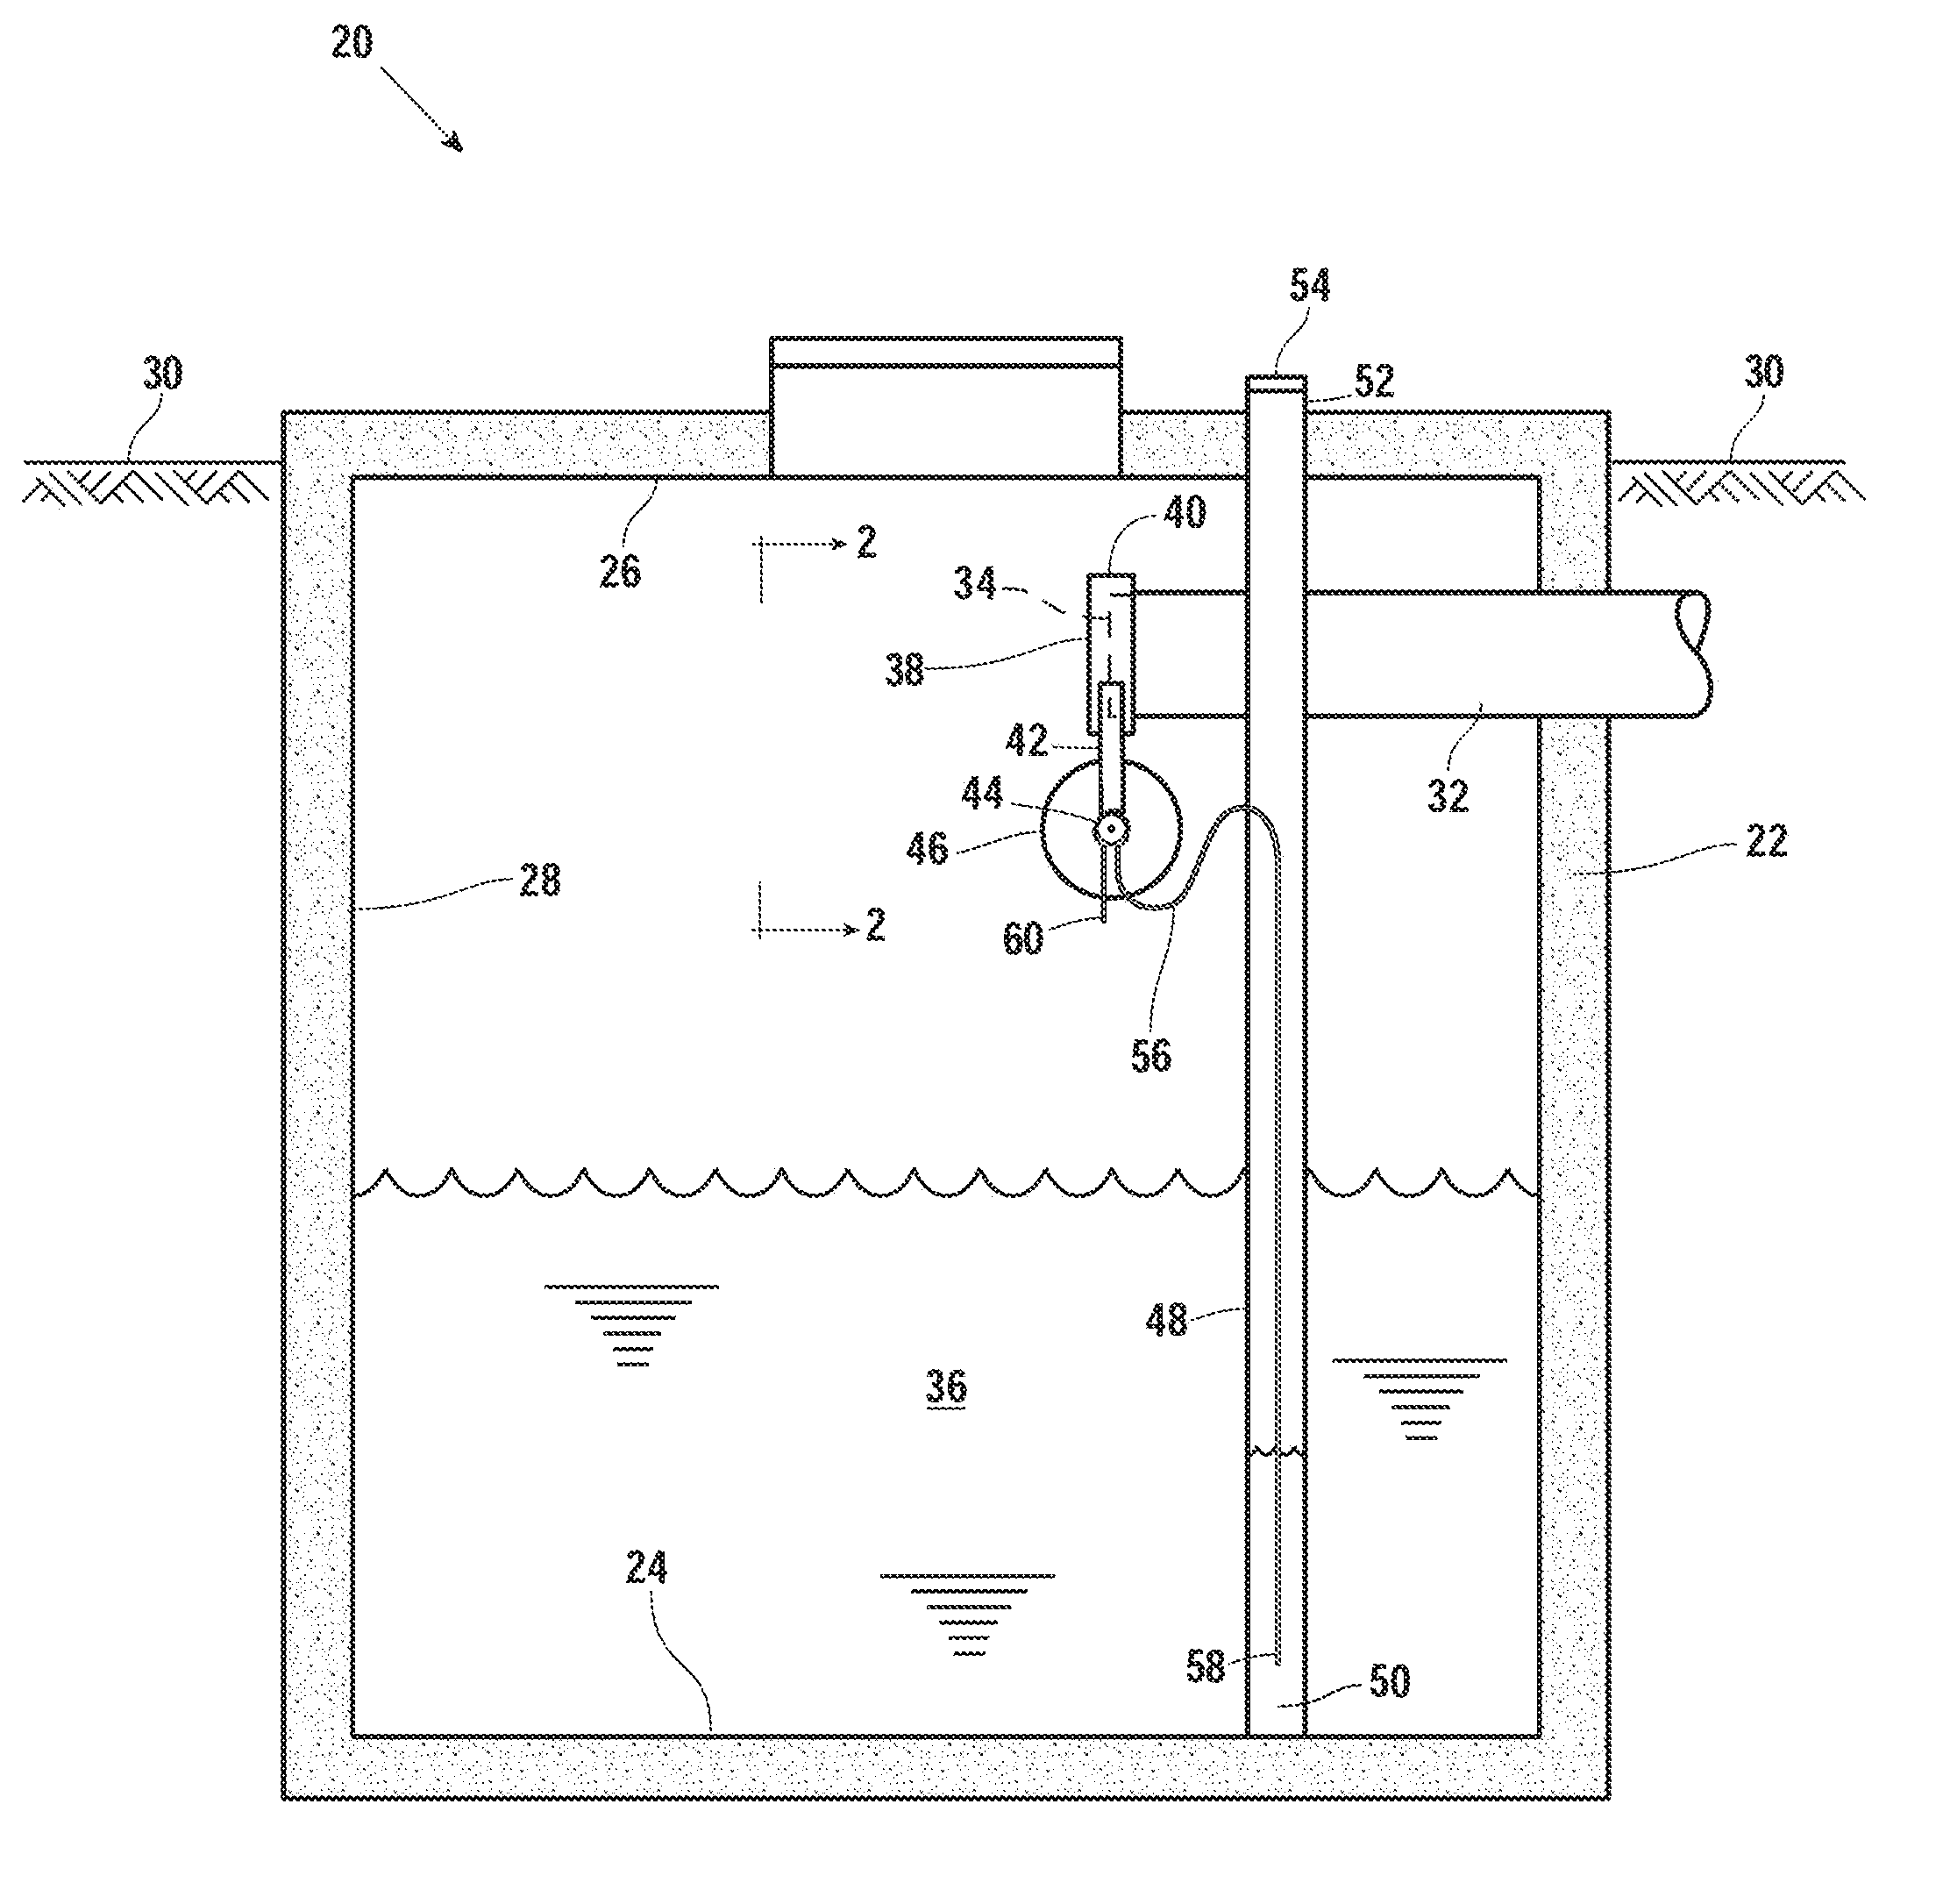 Chemical Delivery System for Water or Effluent Treatment